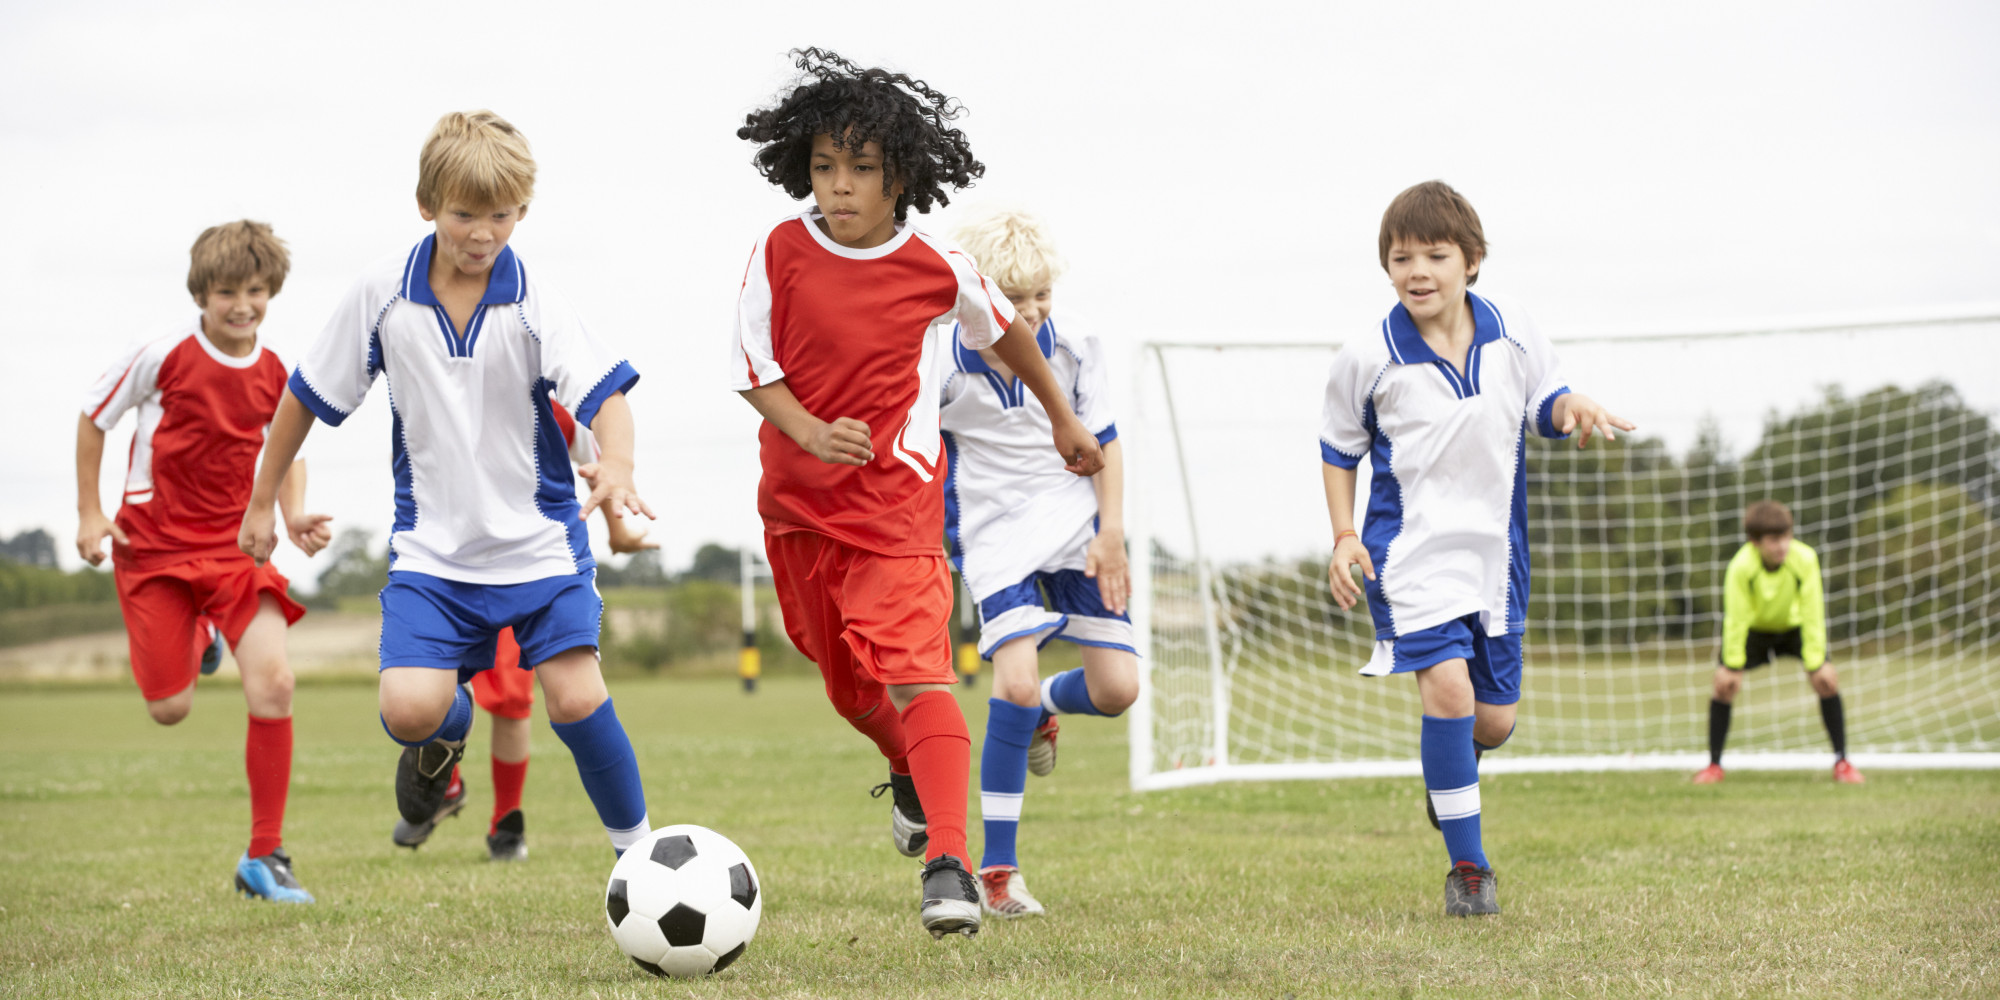 5 aside football and its beneficial influences in children